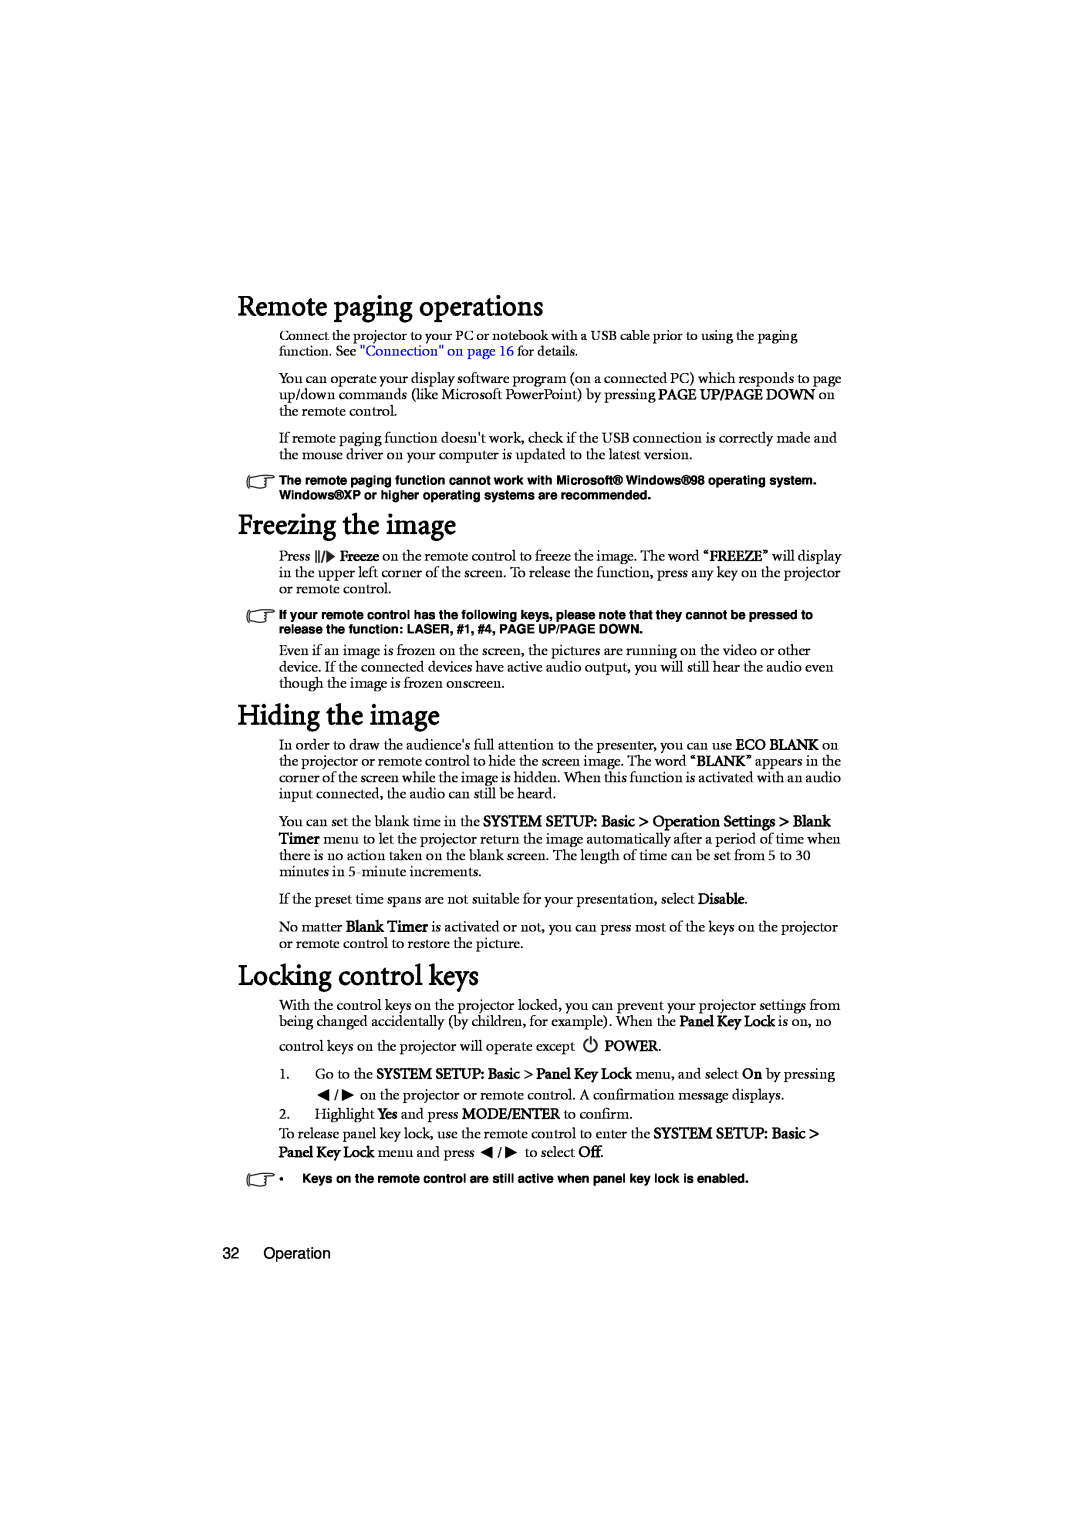 BenQ MX701 user manual Remote paging operations, Freezing the image, Hiding the image, Locking control keys 